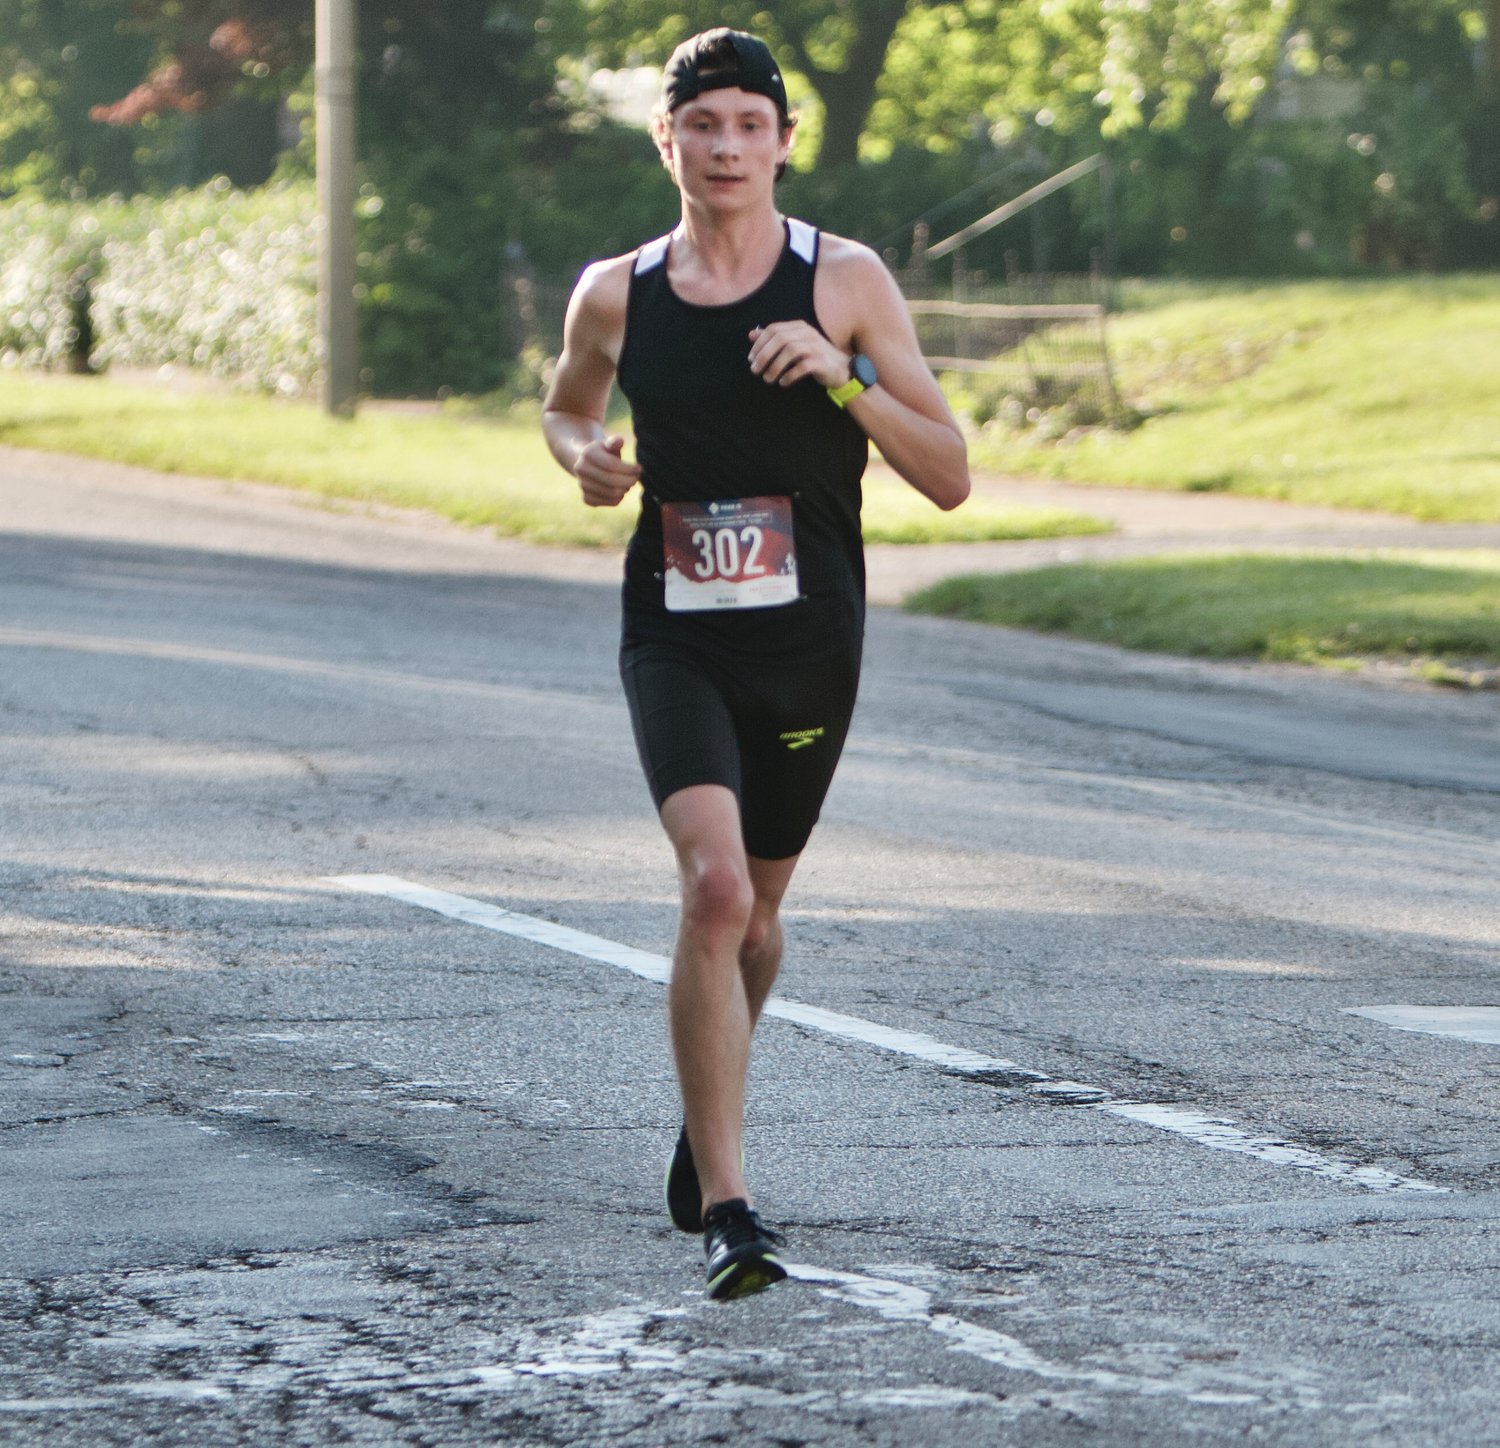 Former Southmont distance runner Brooks Long cruised to a win in the Strawberry Festival 5K on Saturday with a time of 16:49.5.